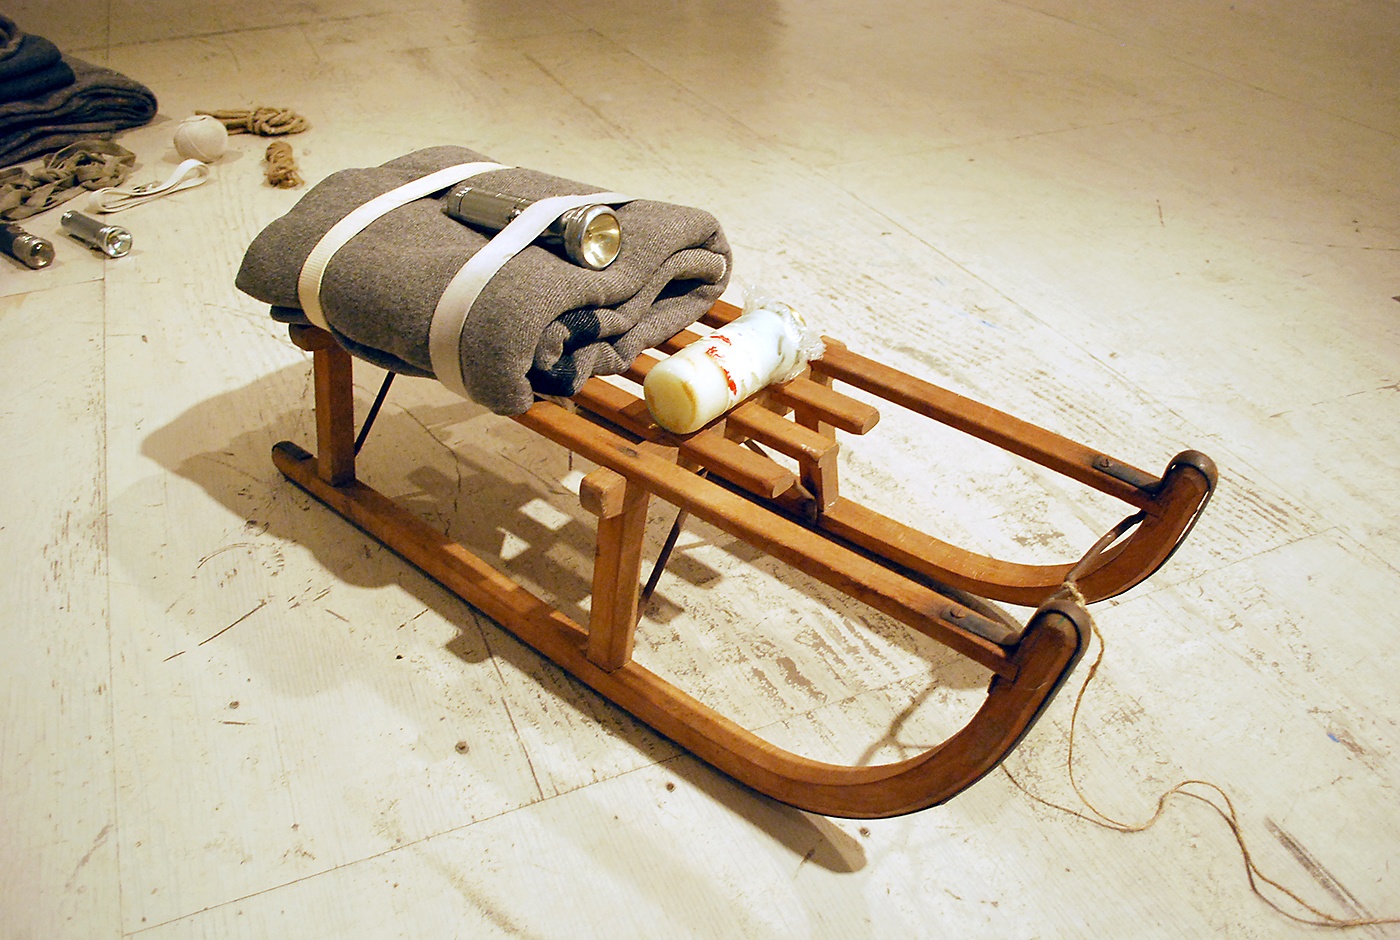 A small, old-fashioned, wooden sled with a gray folded blanket and silver flashlight strapped to the back with two white straps.